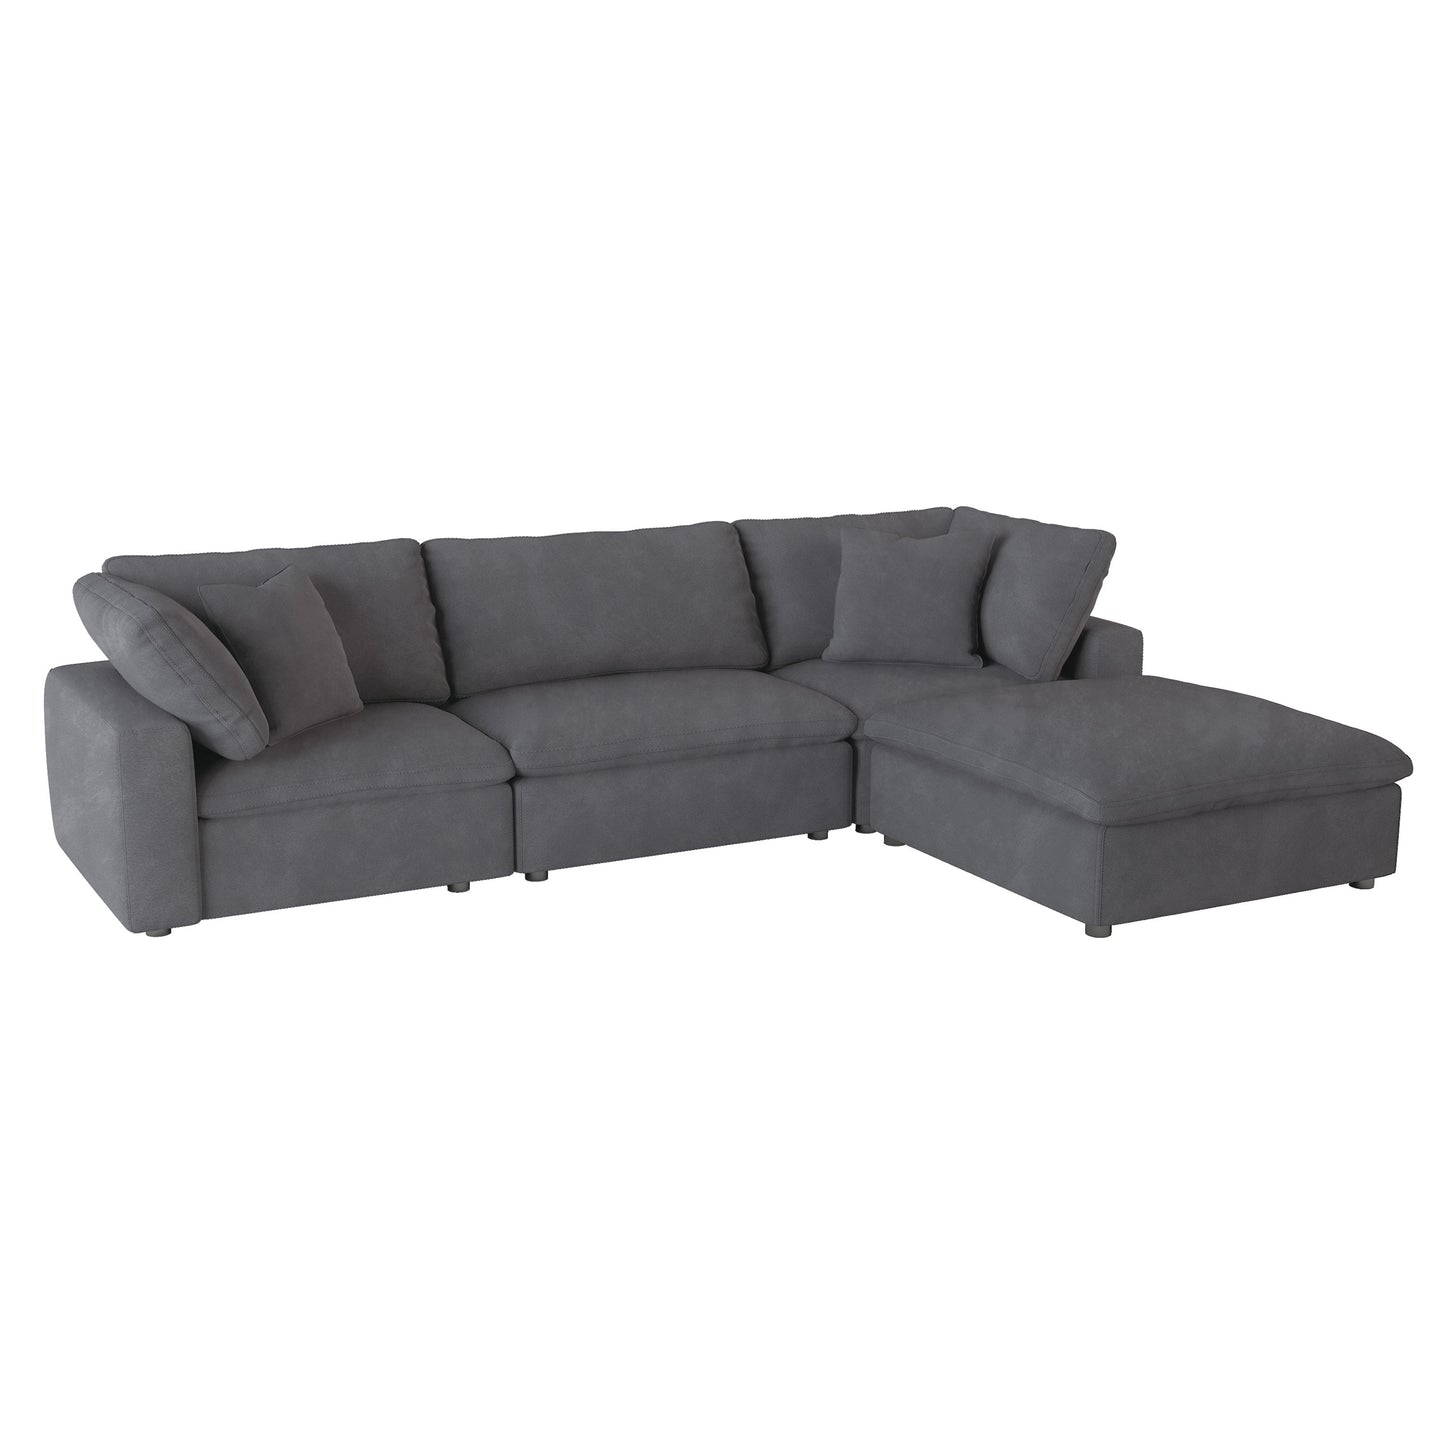 Guthrie 4PCS Sectional GREY ONLY